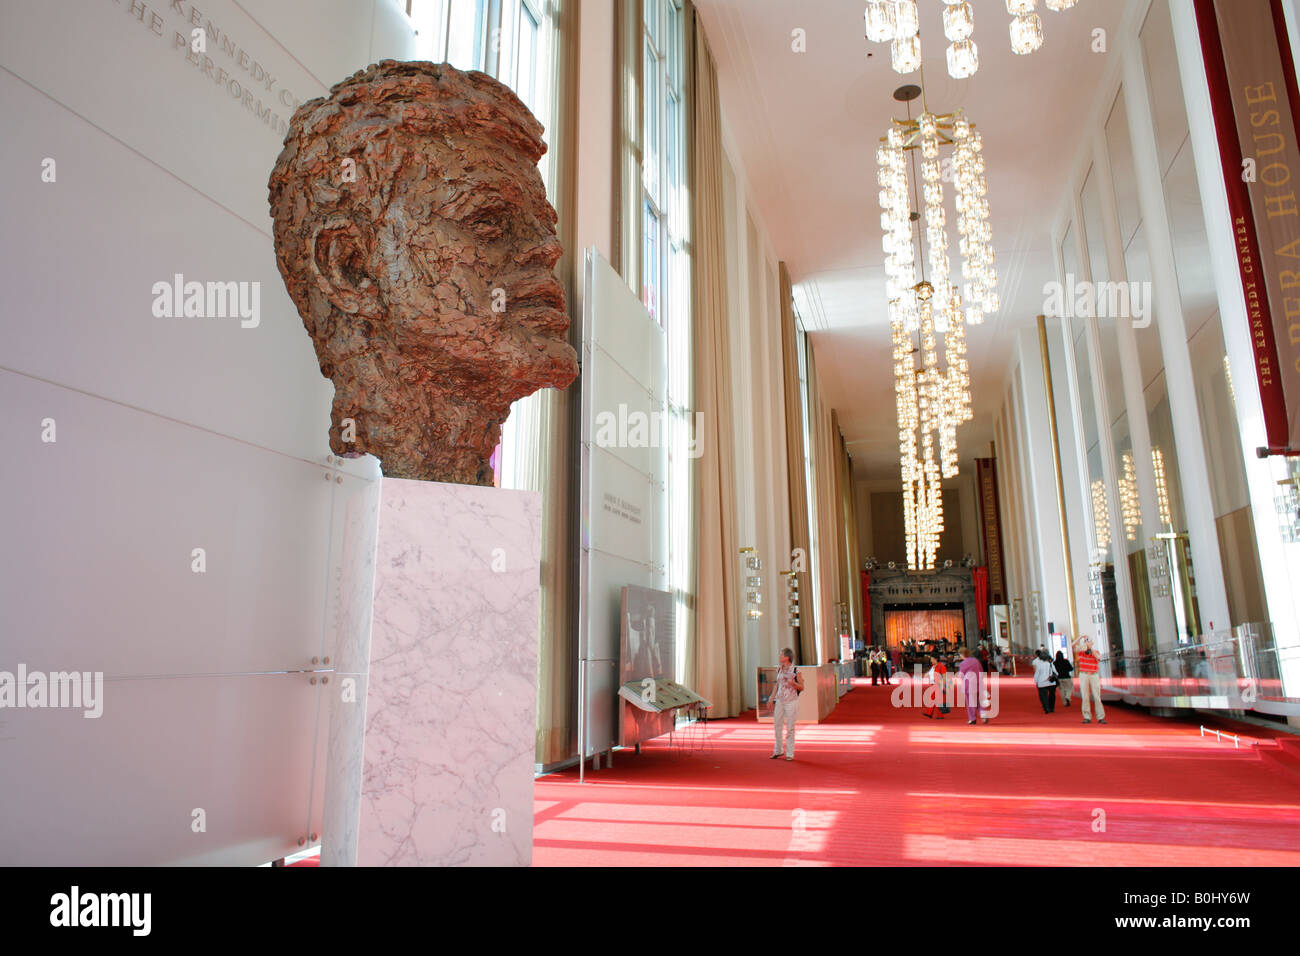 Le John F. Kennedy Center for the Performing Arts, Washington DC, USA Banque D'Images